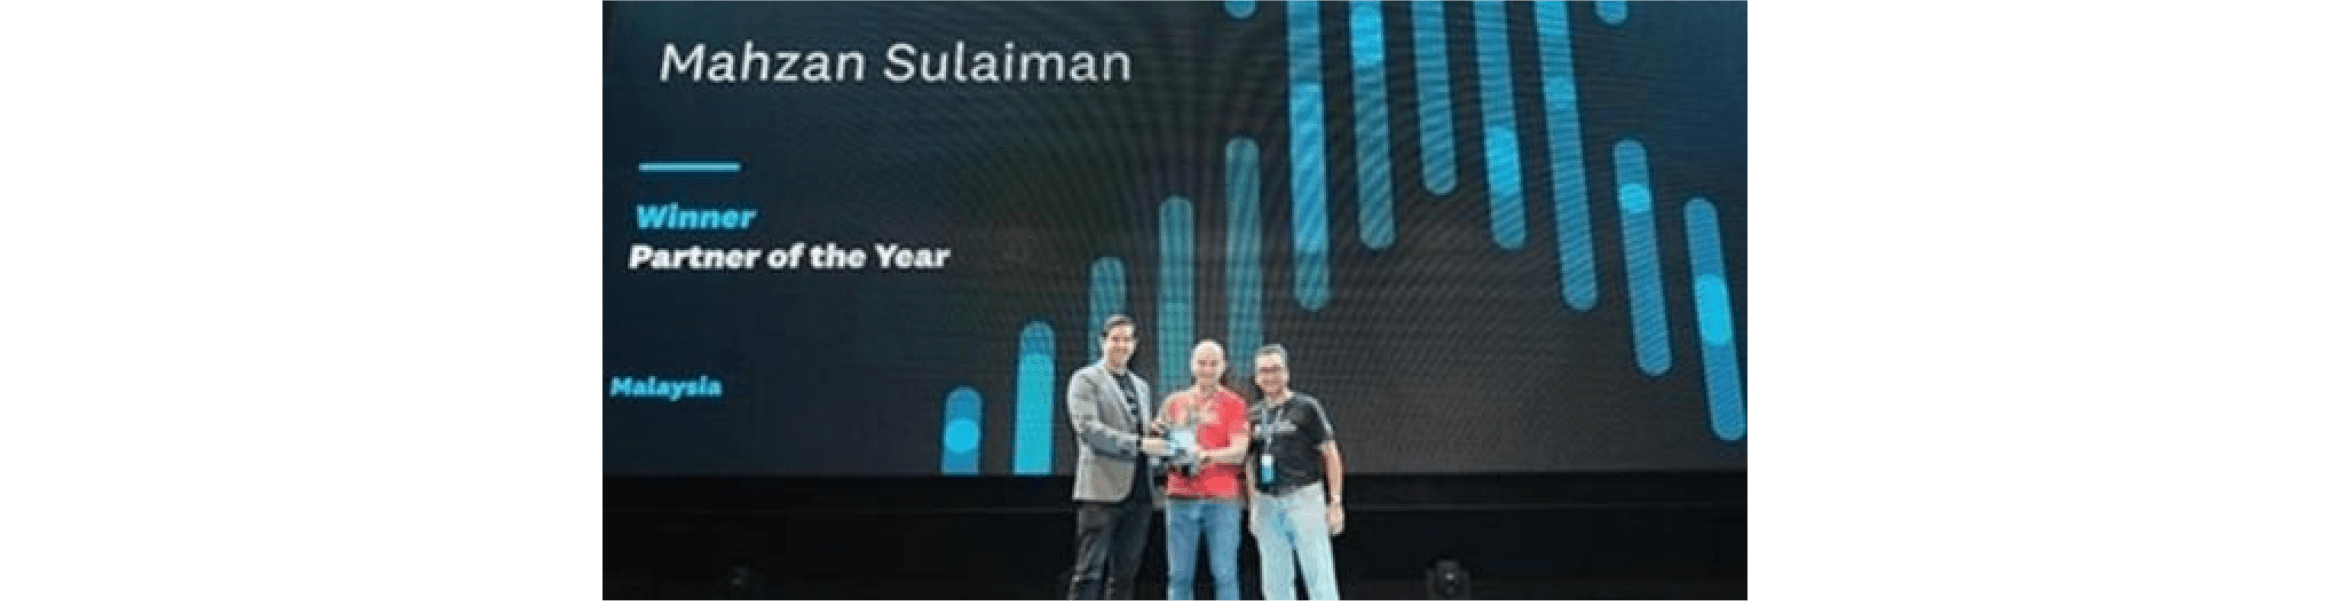 Members of the team at Mahzan Sulaiman celebrate winning the Malaysia Accounting Partner of the Year award.